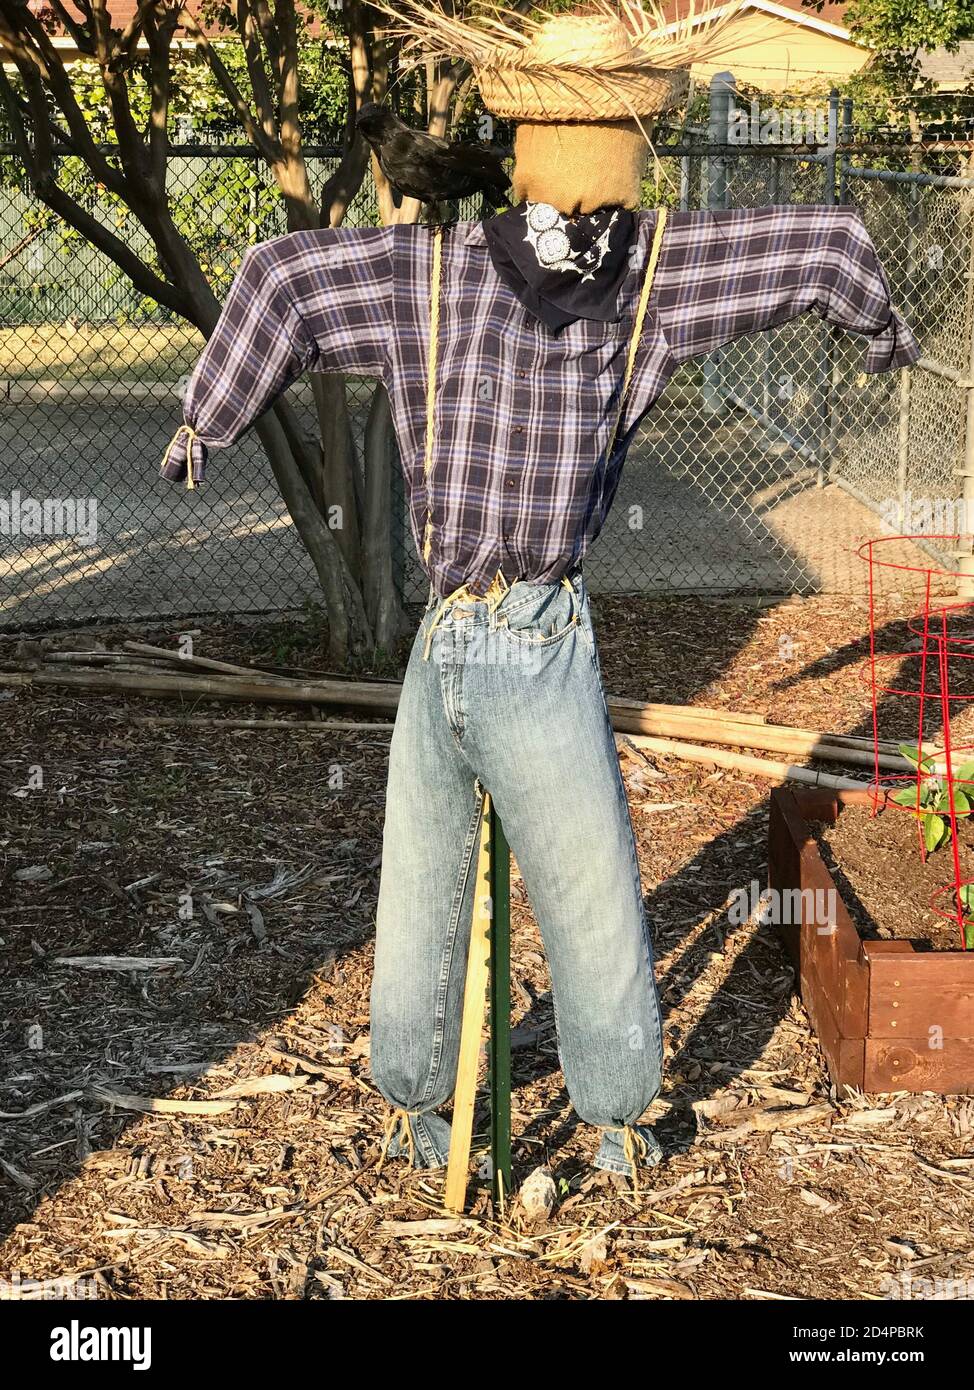 Halloween scarecrow with crow on shoulder Stock Photo